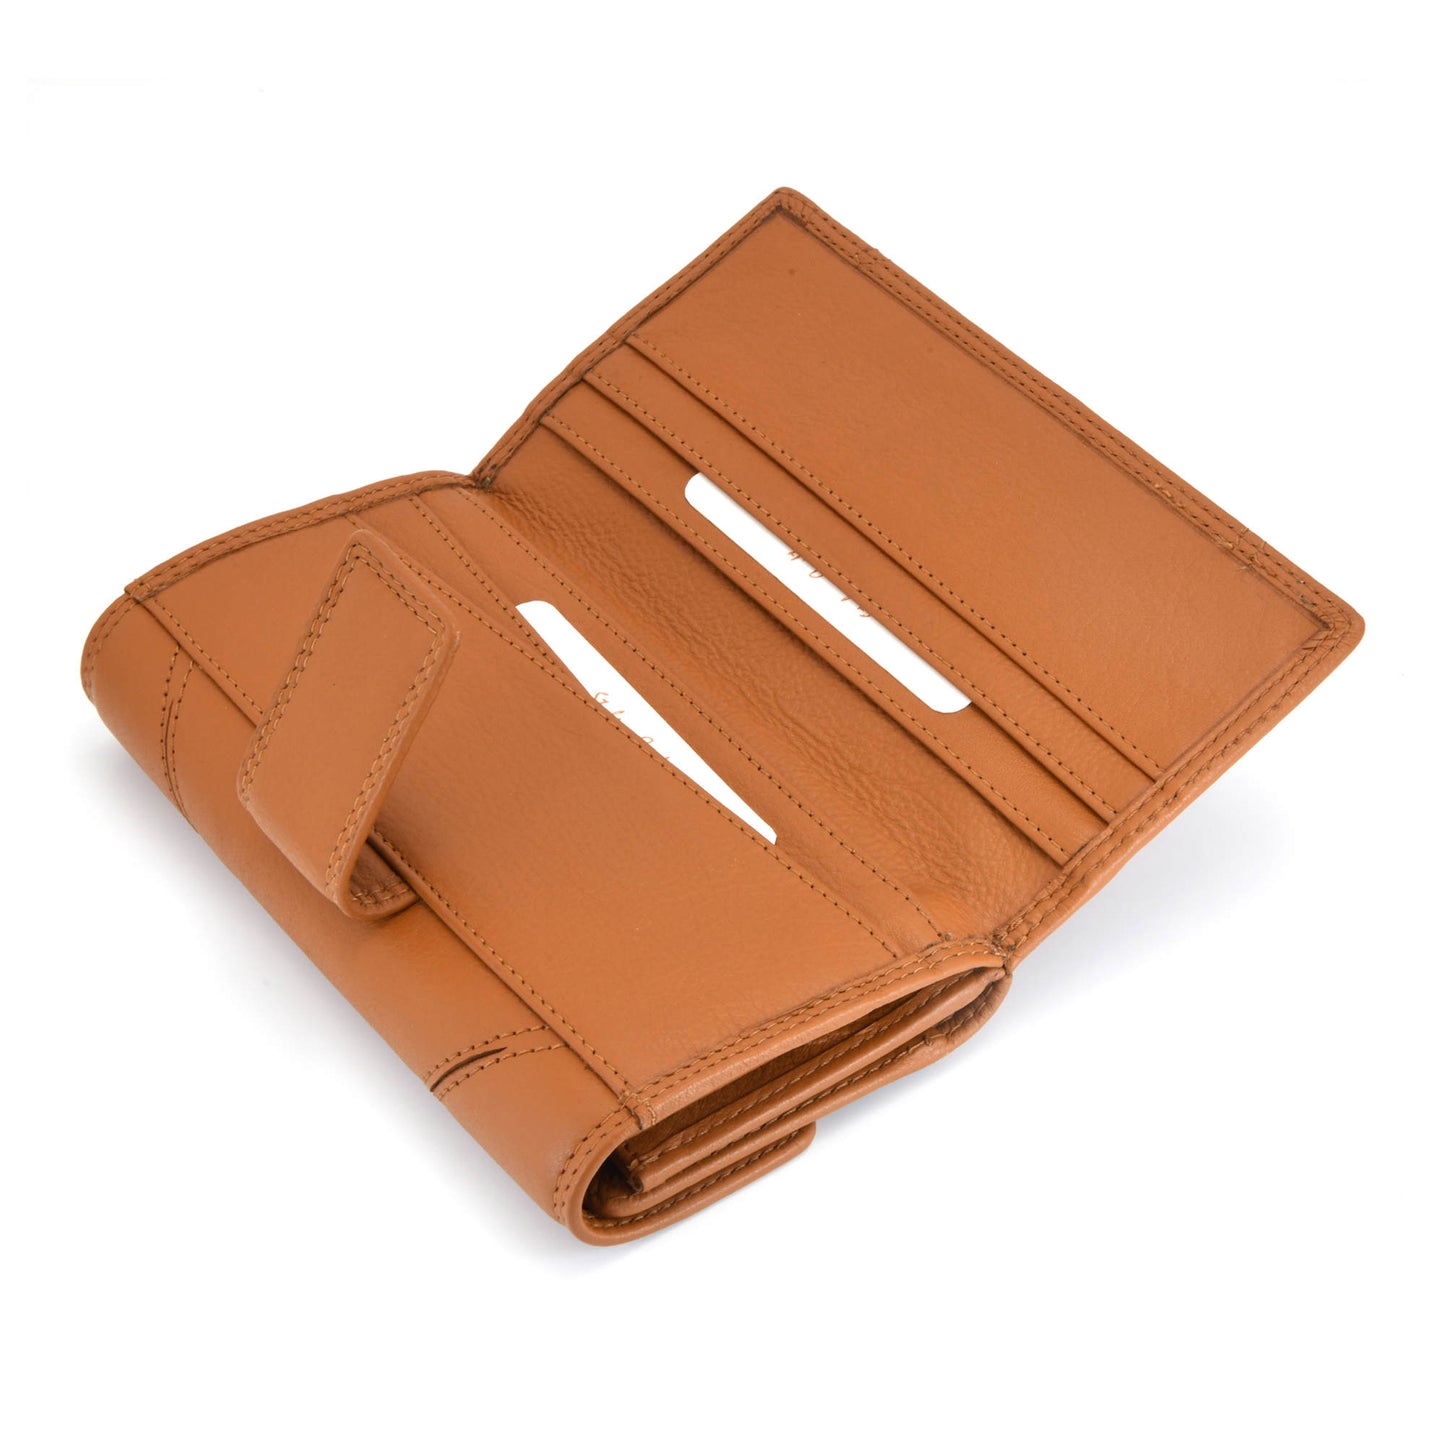 Style n Craft 300954-CG Clutch Wallet for Ladies in Cow Leather - Tan Color - Back Open View